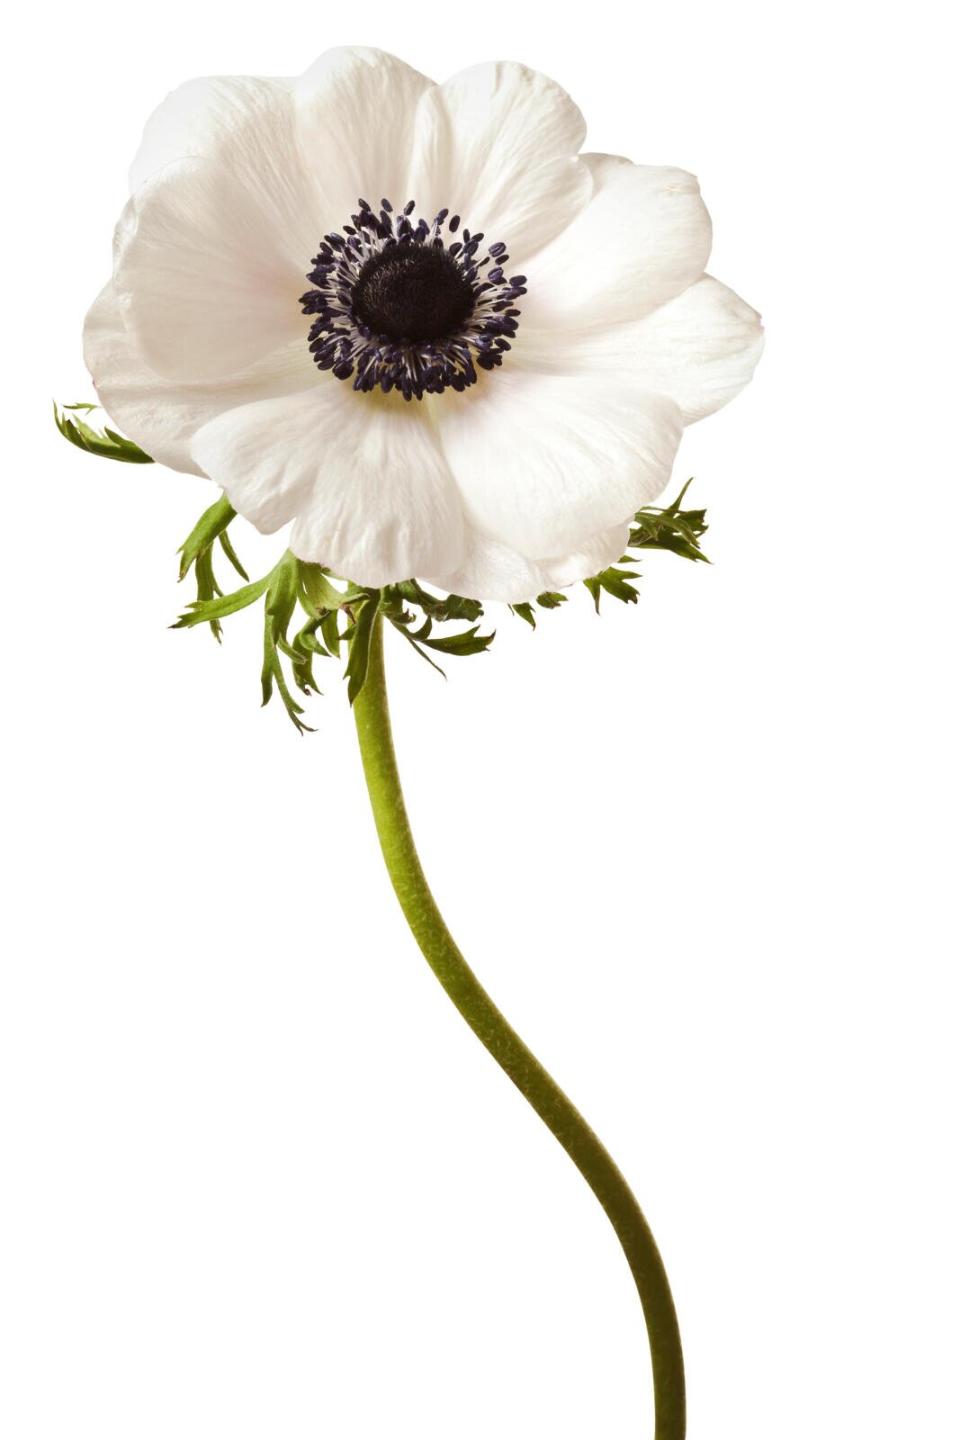 Anemone Flower Care Tips